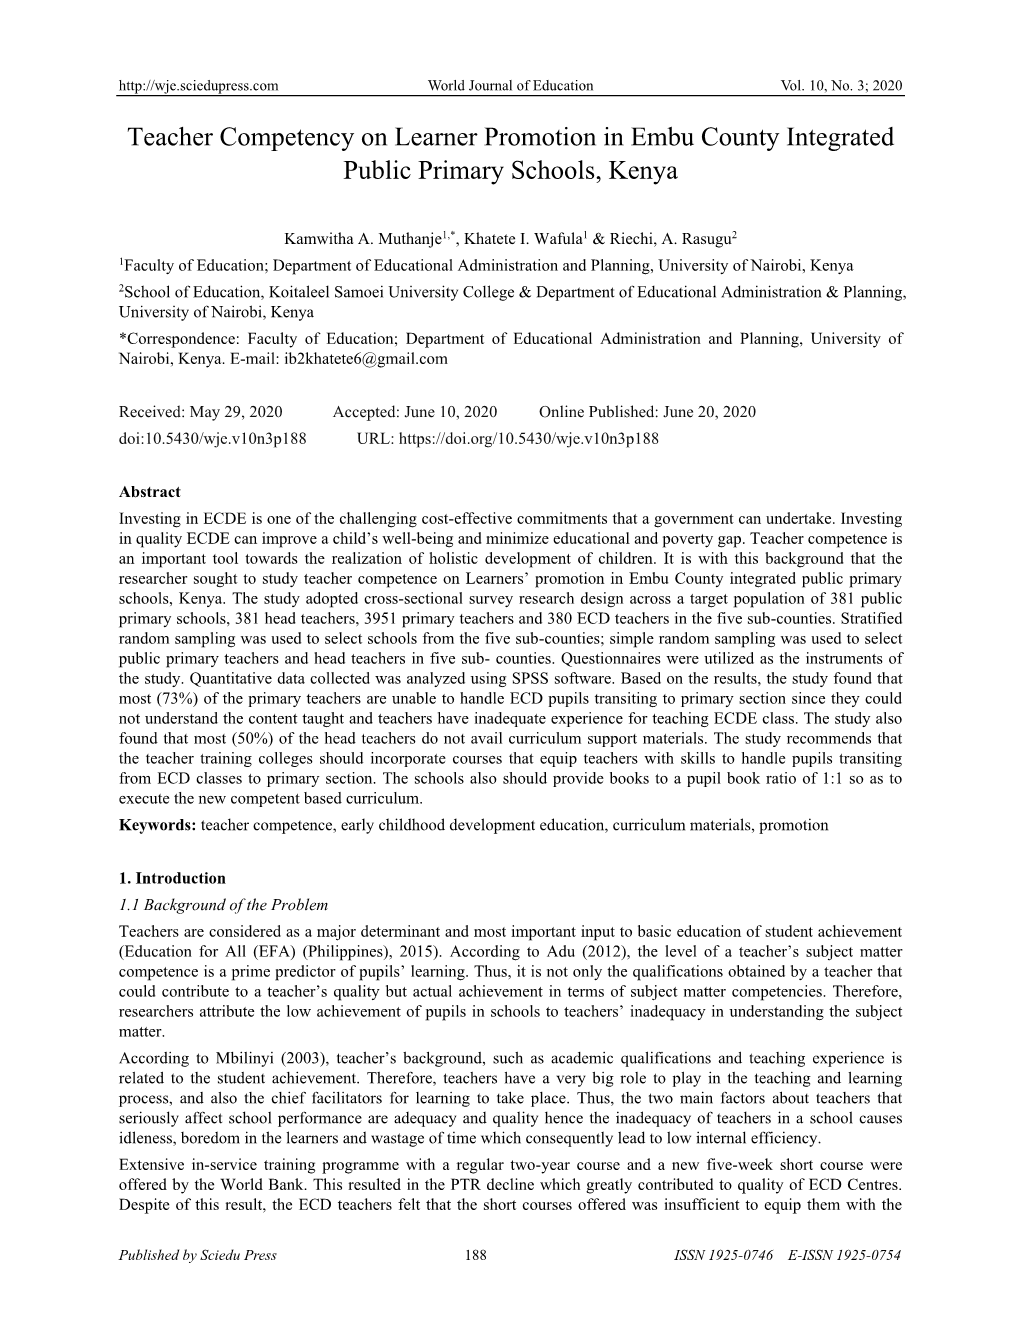 Teacher Competency on Learner Promotion in Embu County Integrated Public Primary Schools, Kenya